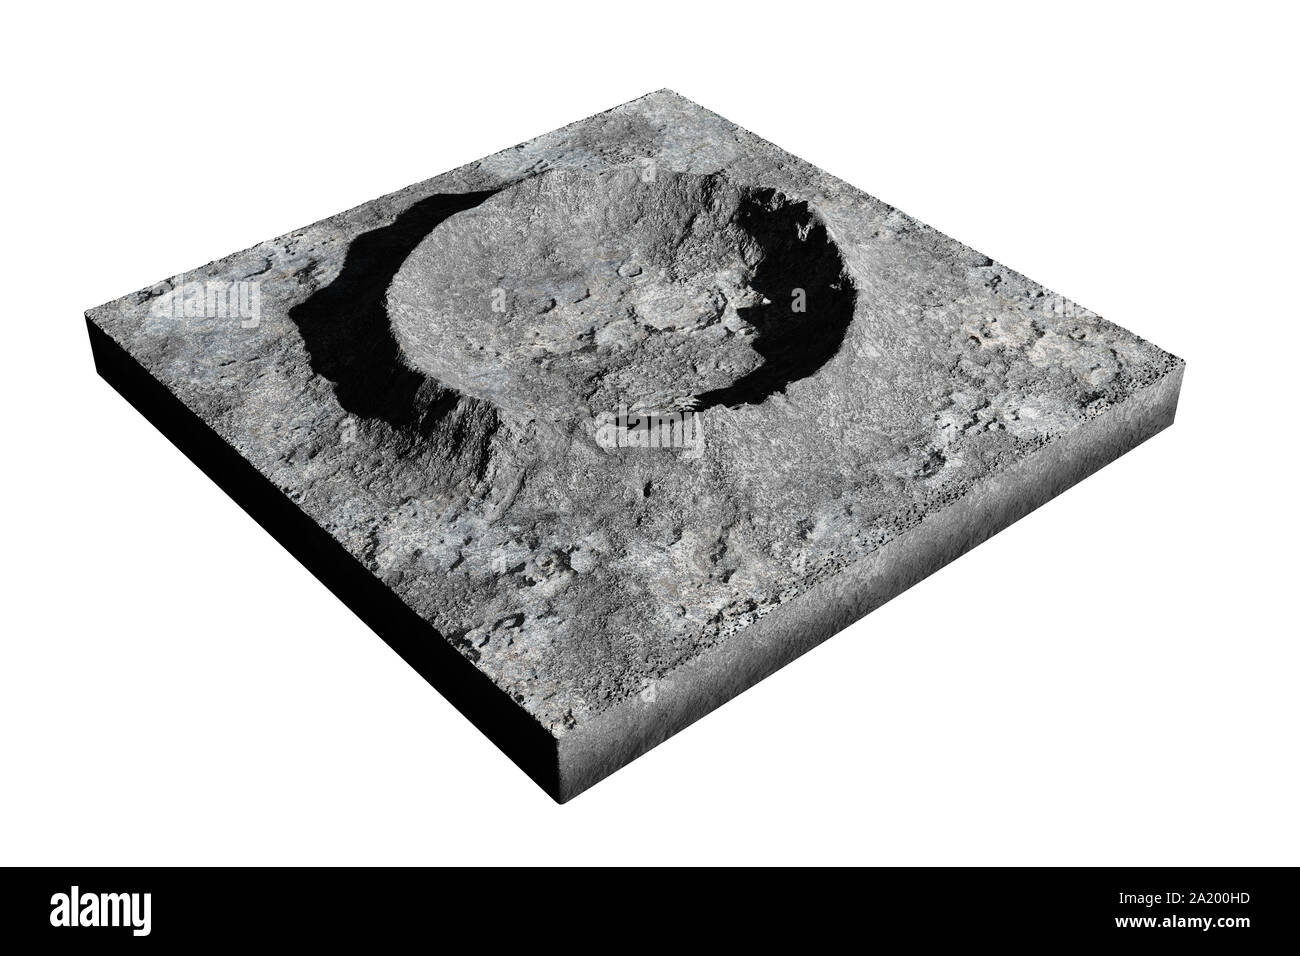 cross section of crater on the surface of the Moon, isolated on white background Stock Photo